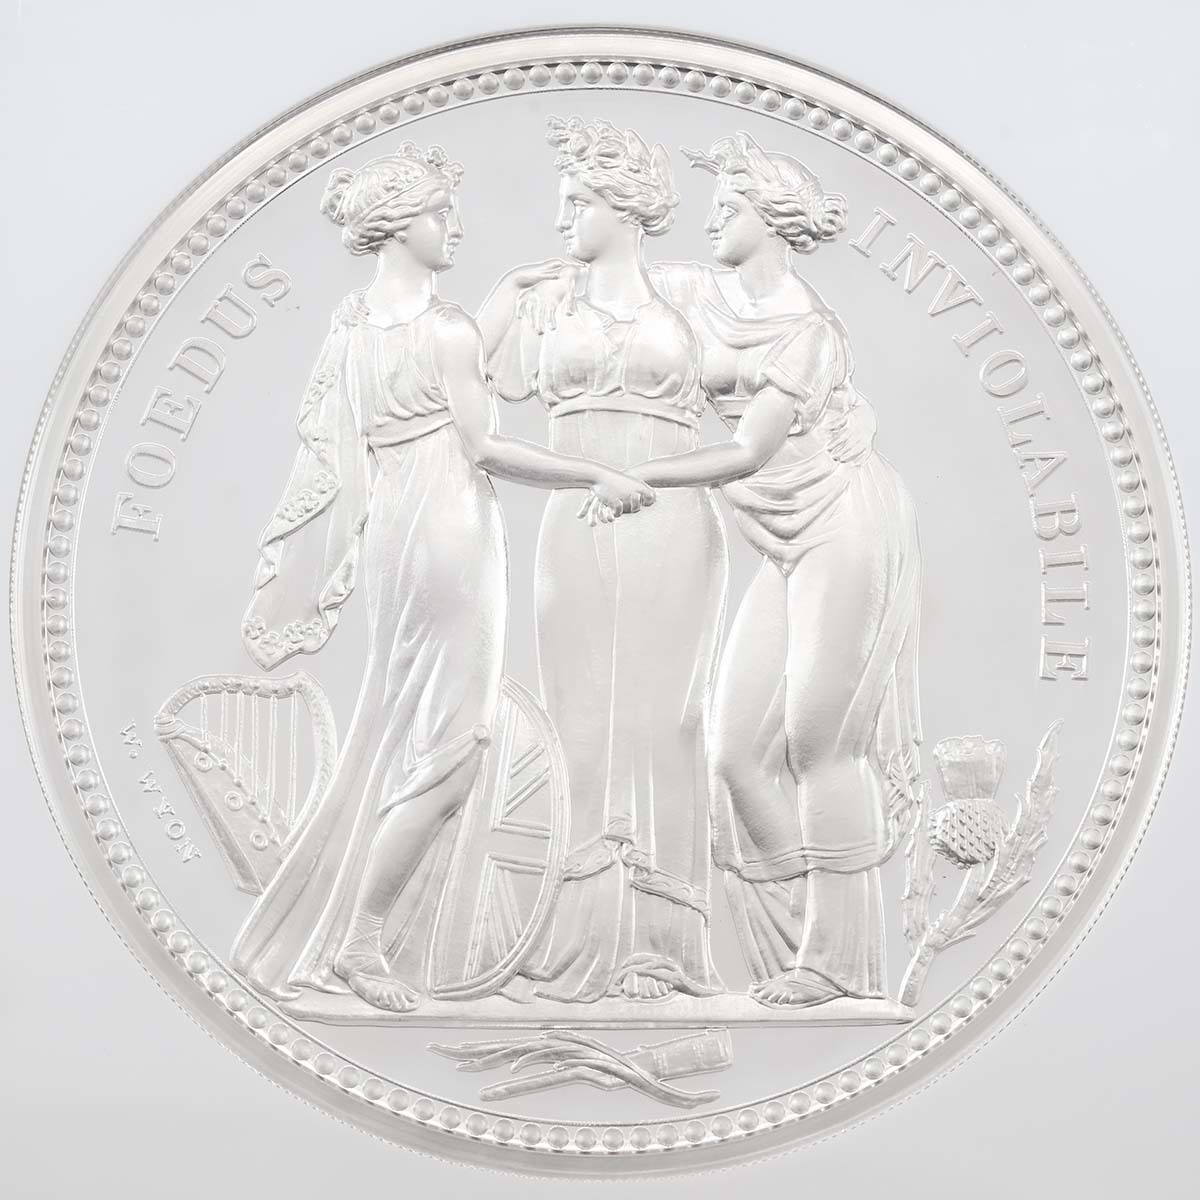 UK20WWKS 2020 Three Graces 1 Kilo Silver Proof PF 70 First Releases Reverse